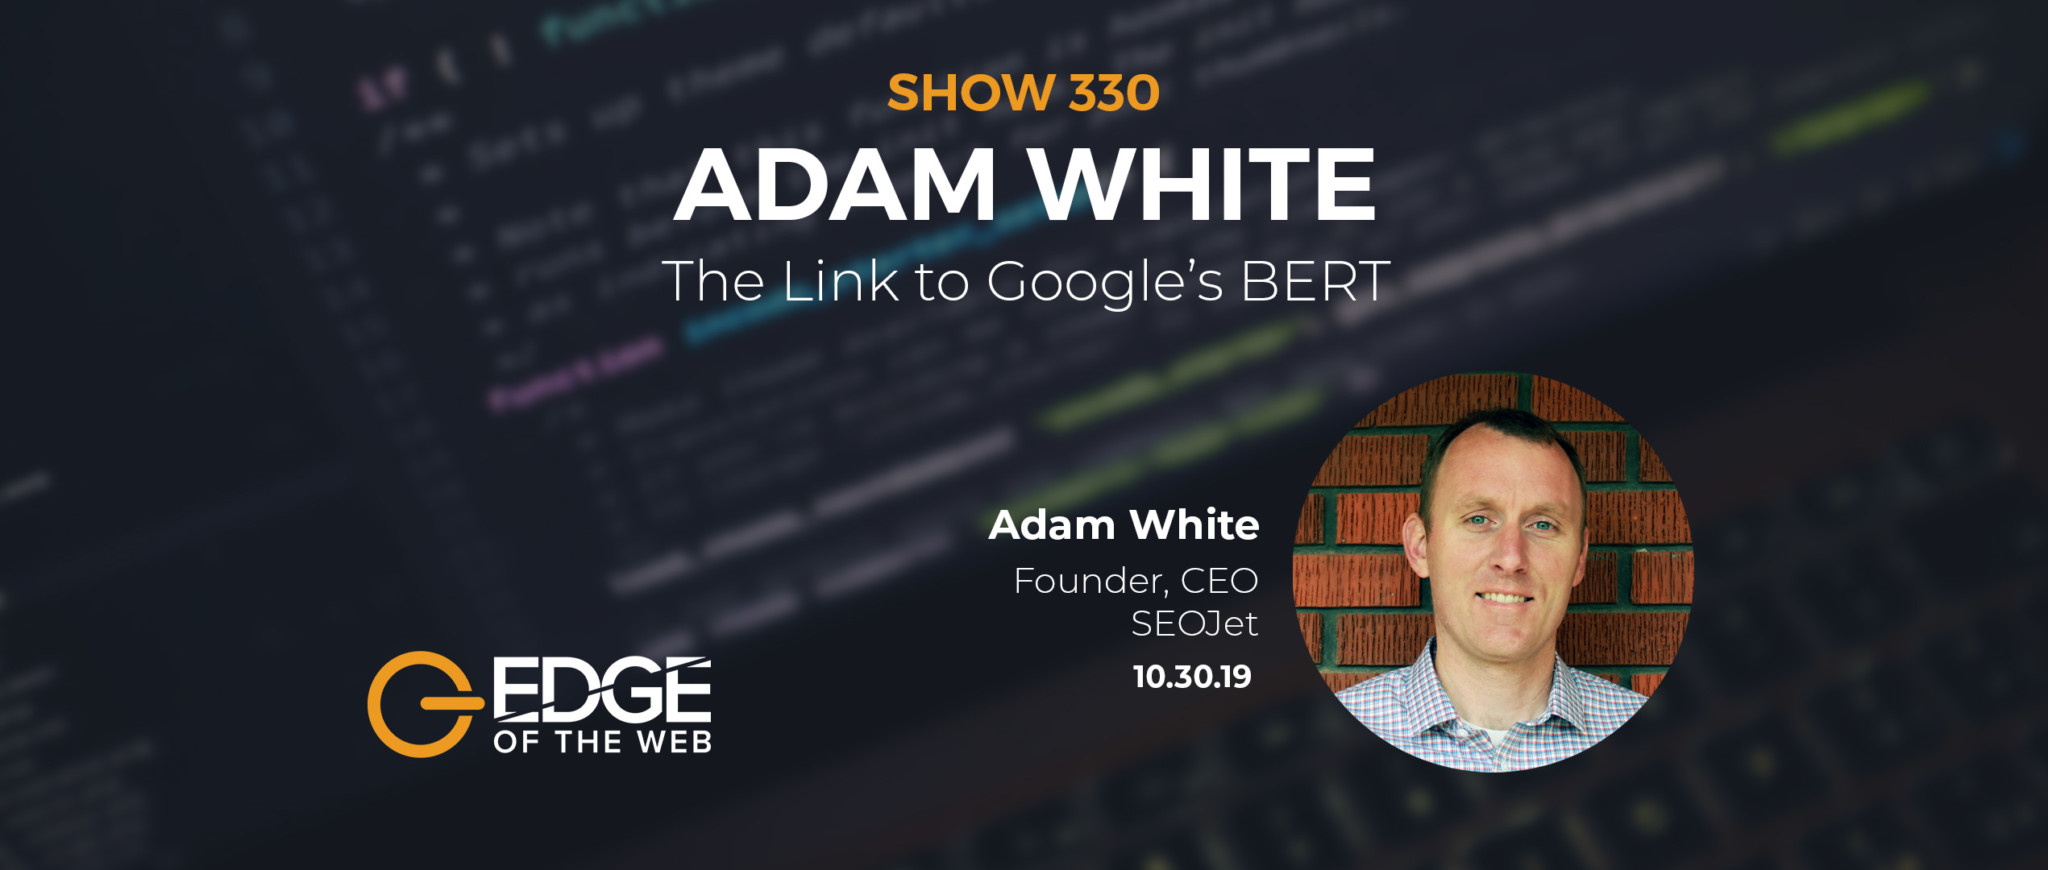 Show 330: The Link to Google's BERT, featuring Adam White